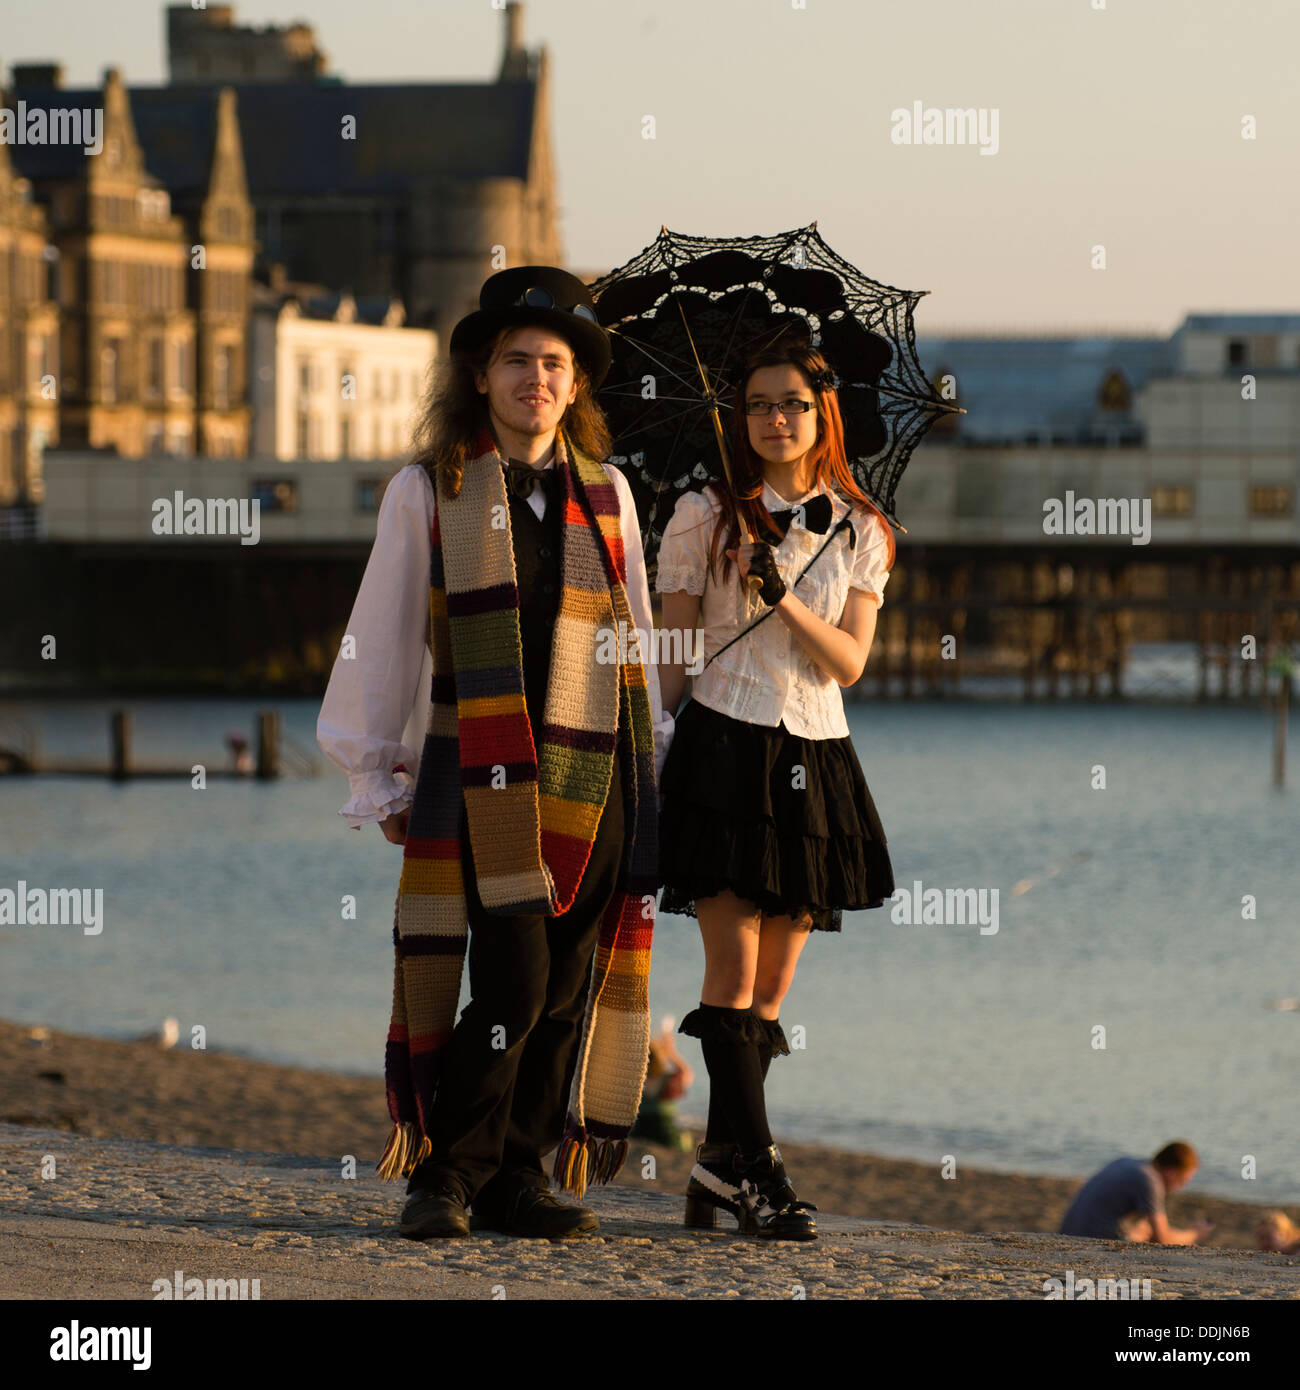 A young couple , cosplay, fantasy dressing, summer evening, Aberystwyth UK Stock Photo